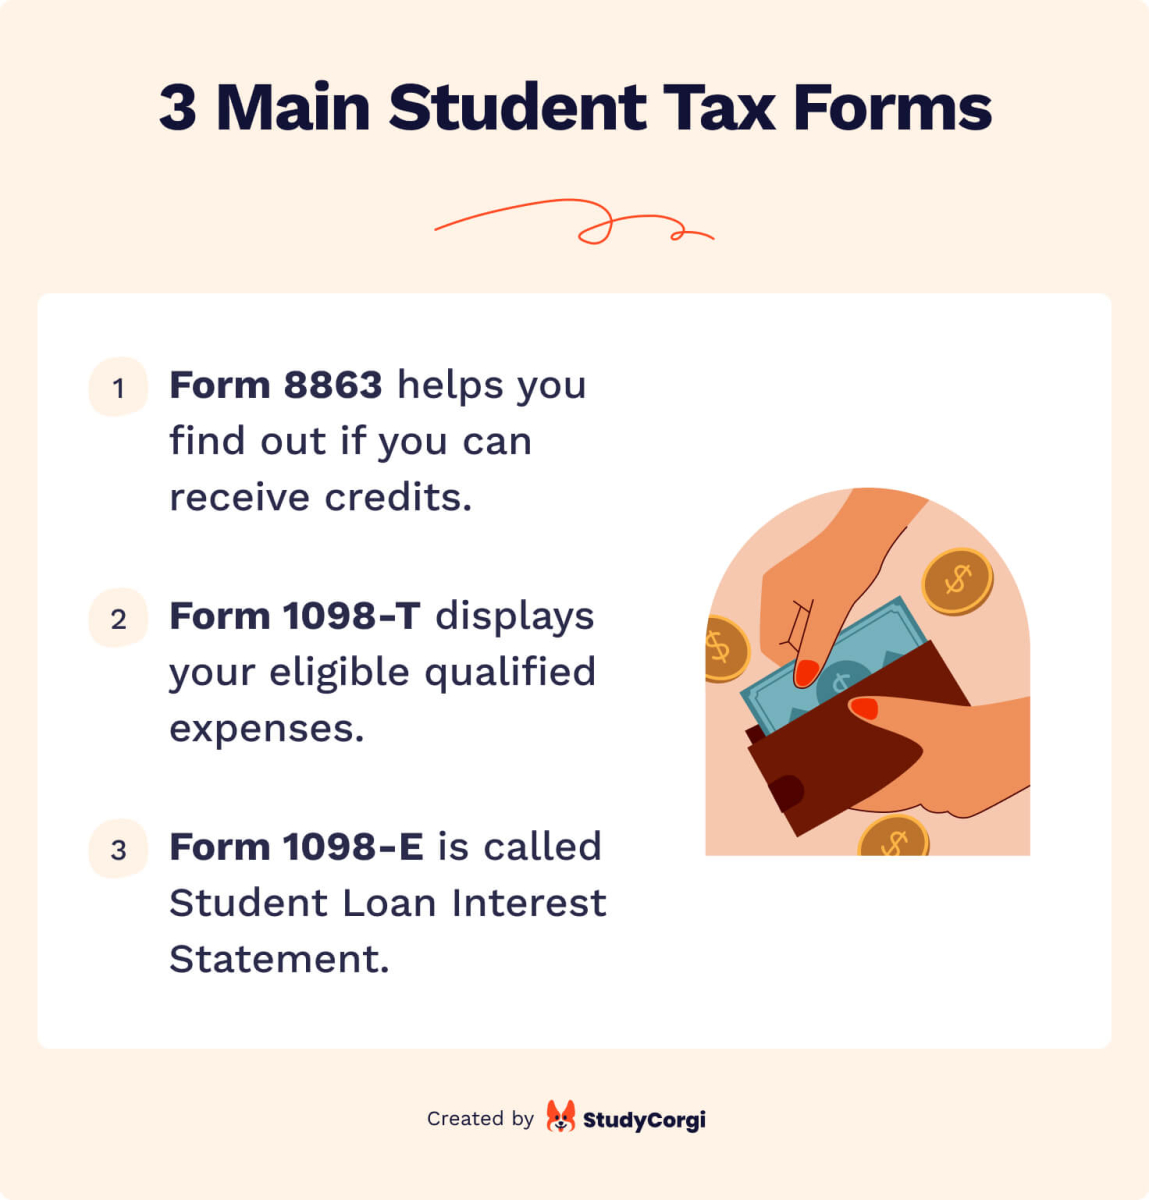 The picture enumerates 3 student tax forms: form 8863, 1098-T, and 1098-E.